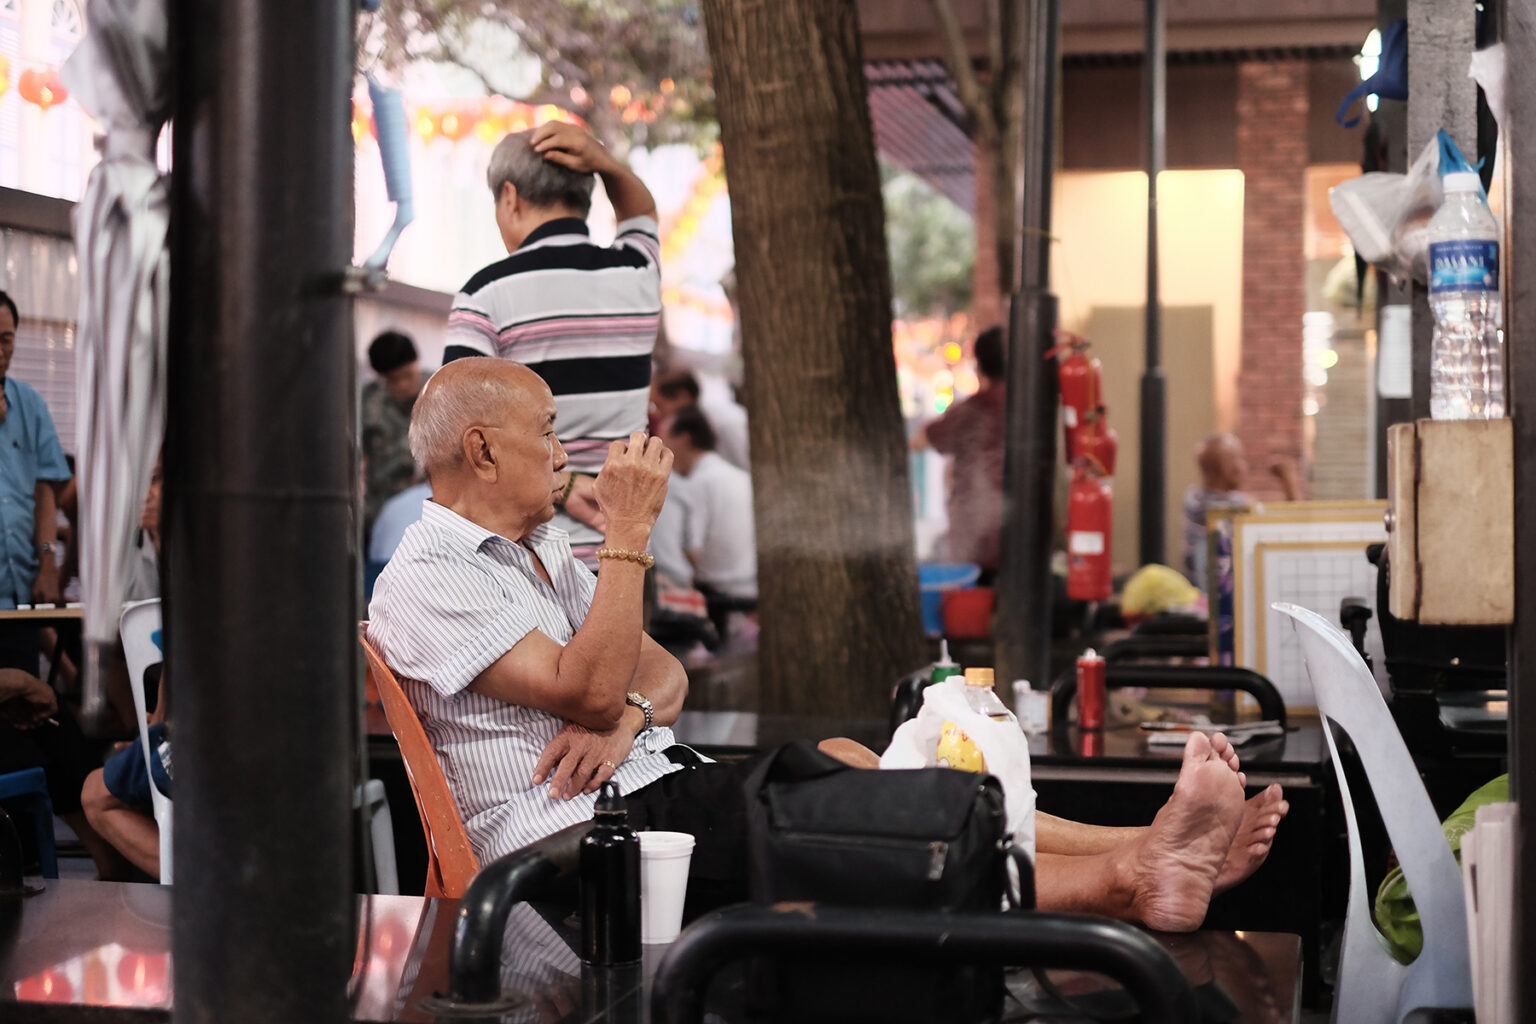 An older man relaxes outside, sitting on a bench or at a café - bare feet on a chair, enjoying a smoke